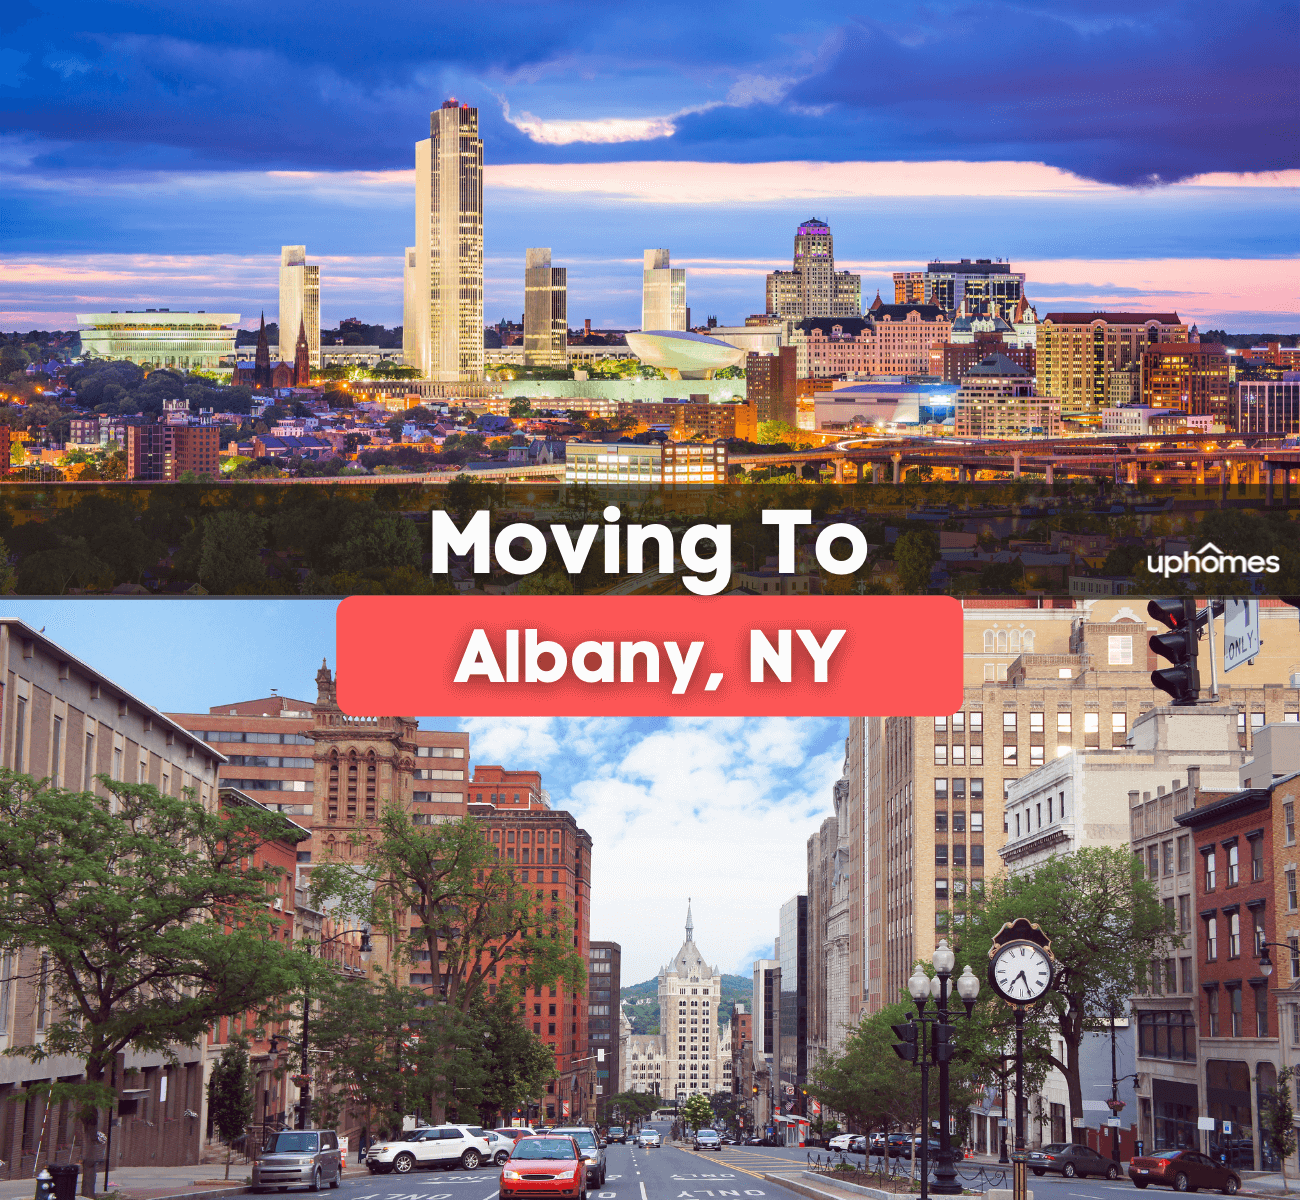 Moving to Albany, New York - What is it like living in Albany, NY?